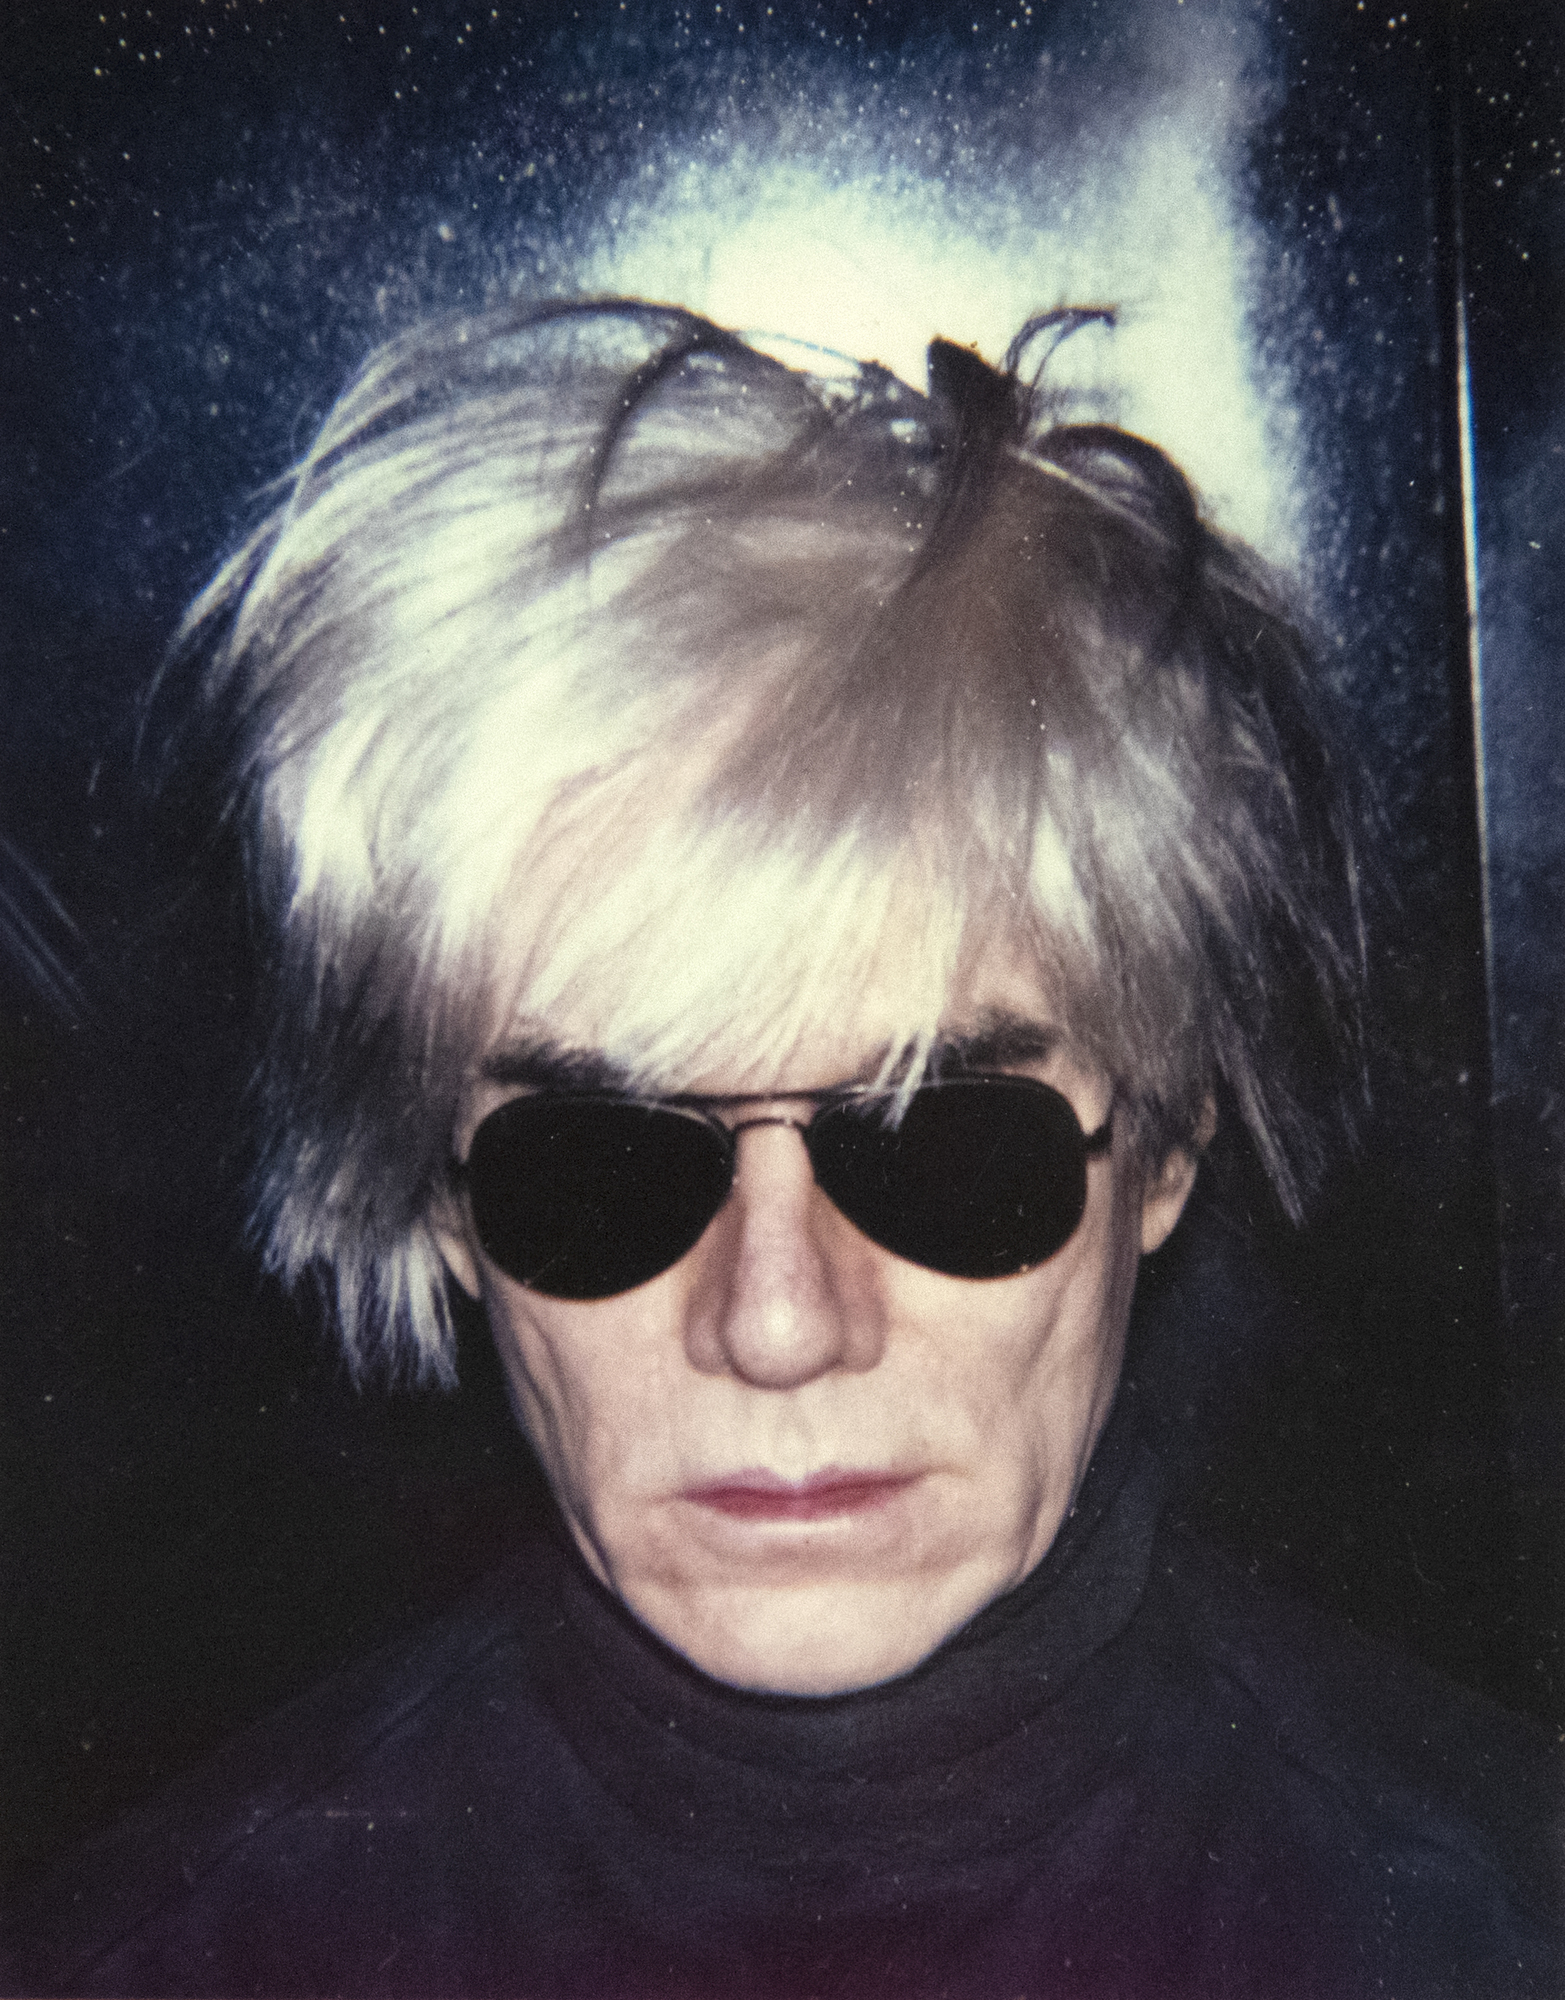 Beginning in 1963, with a silkscreen derived from a photo booth strip, Warhol repeatedly explored his likeness, culminating with the iconic "Fright Wig" image. Essential to his depiction of celebrities and self-representation, the Polaroid photograph played a crucial role in his work and our perceptions of his massive contribution to post-war art in America. The two images presented, dark and spooky, are beautifully crafted, well-staged portraits. Enveloped in a moody ambiance that eviscerates his body, these self-portraits depict Andy clad in this iconic wig and dark aviator sunglasses, set against a backdrop so deeply shadowed that his head seems to float in a void of darkness. Warhol loved role-playing, and here it is in spades!